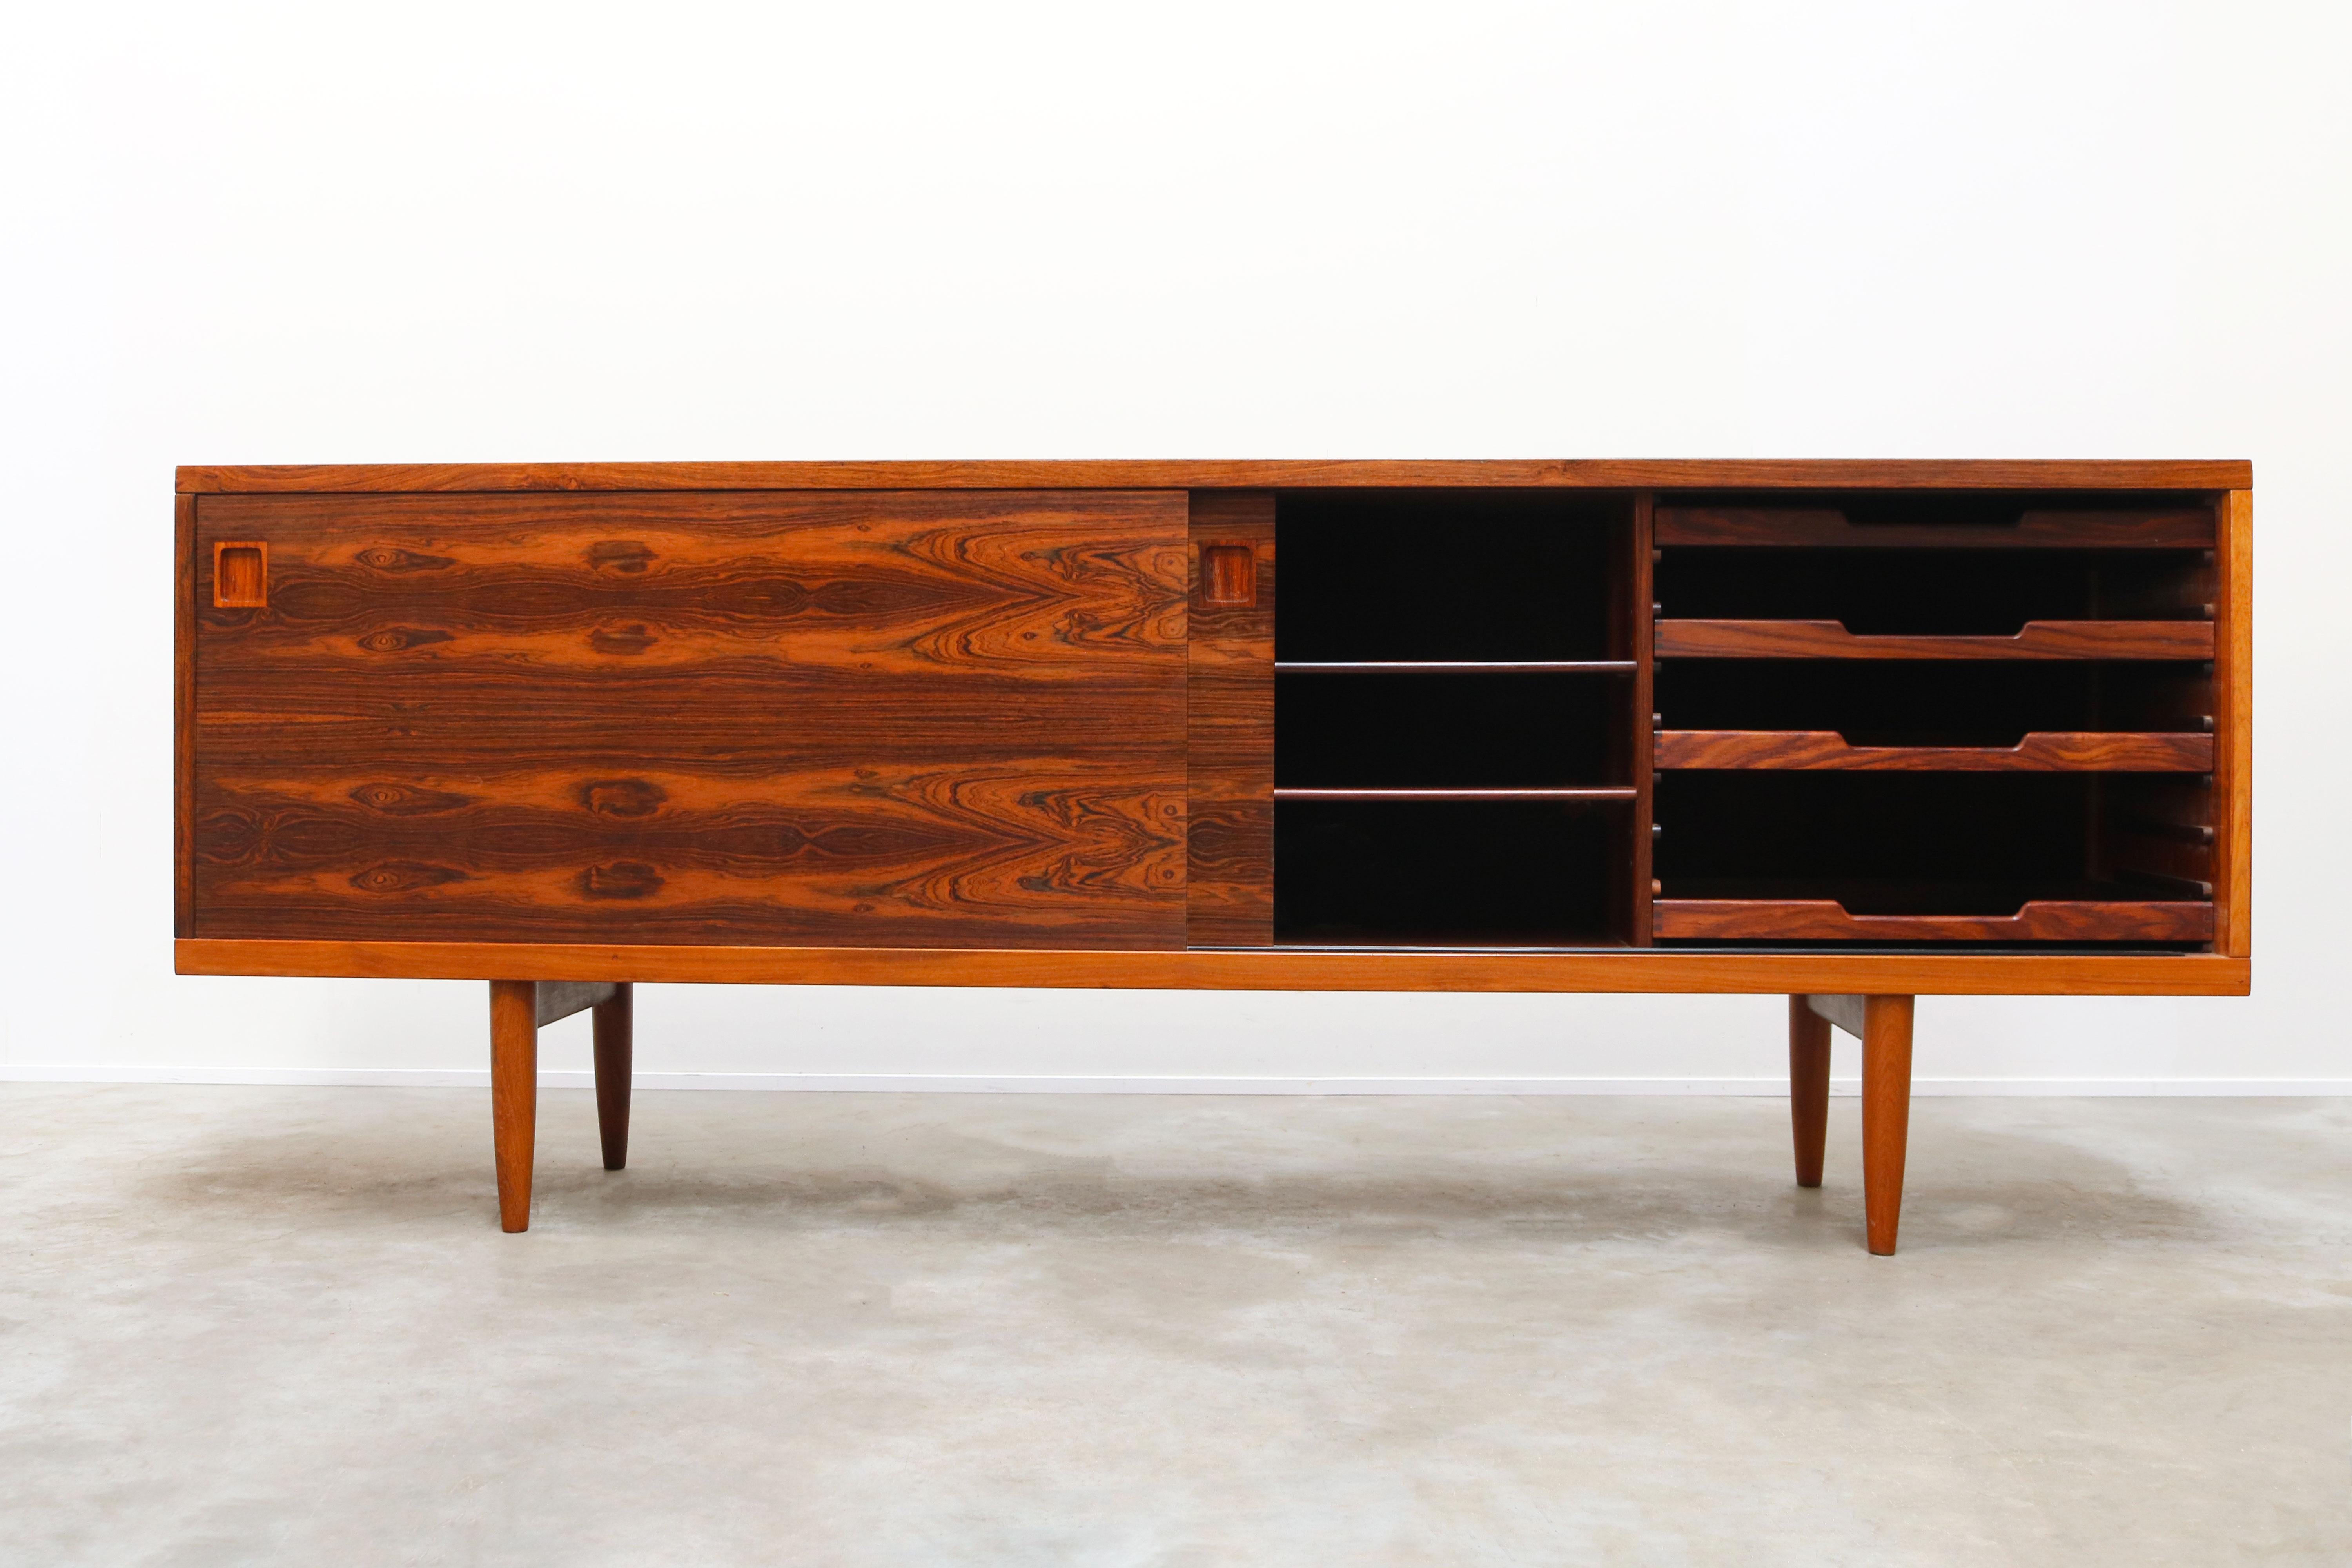 Rare Danish Credenza / Sideboard Model 20 by Niels Otto Moller 1950 Rosewood For Sale 1